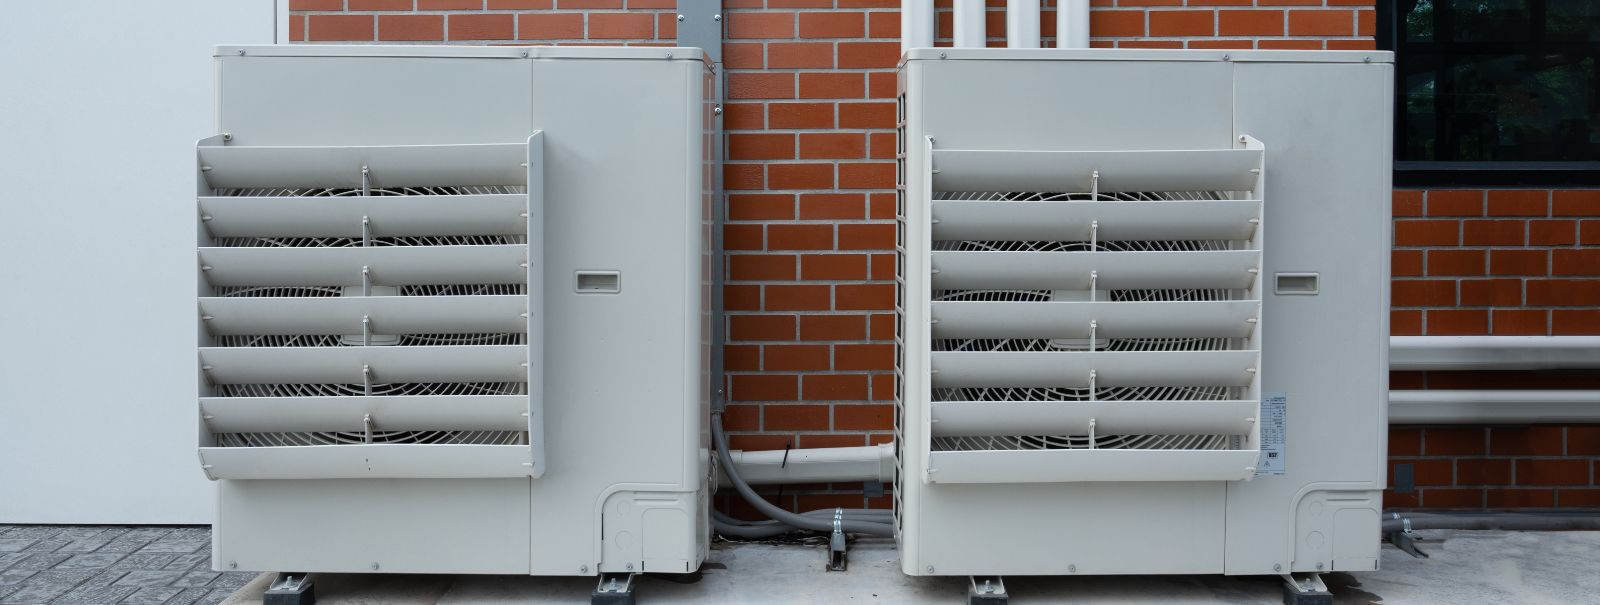 A heat pump is a versatile and efficient climate control device that transfers heat from one place to another. It can be used to heat or cool a space and is par